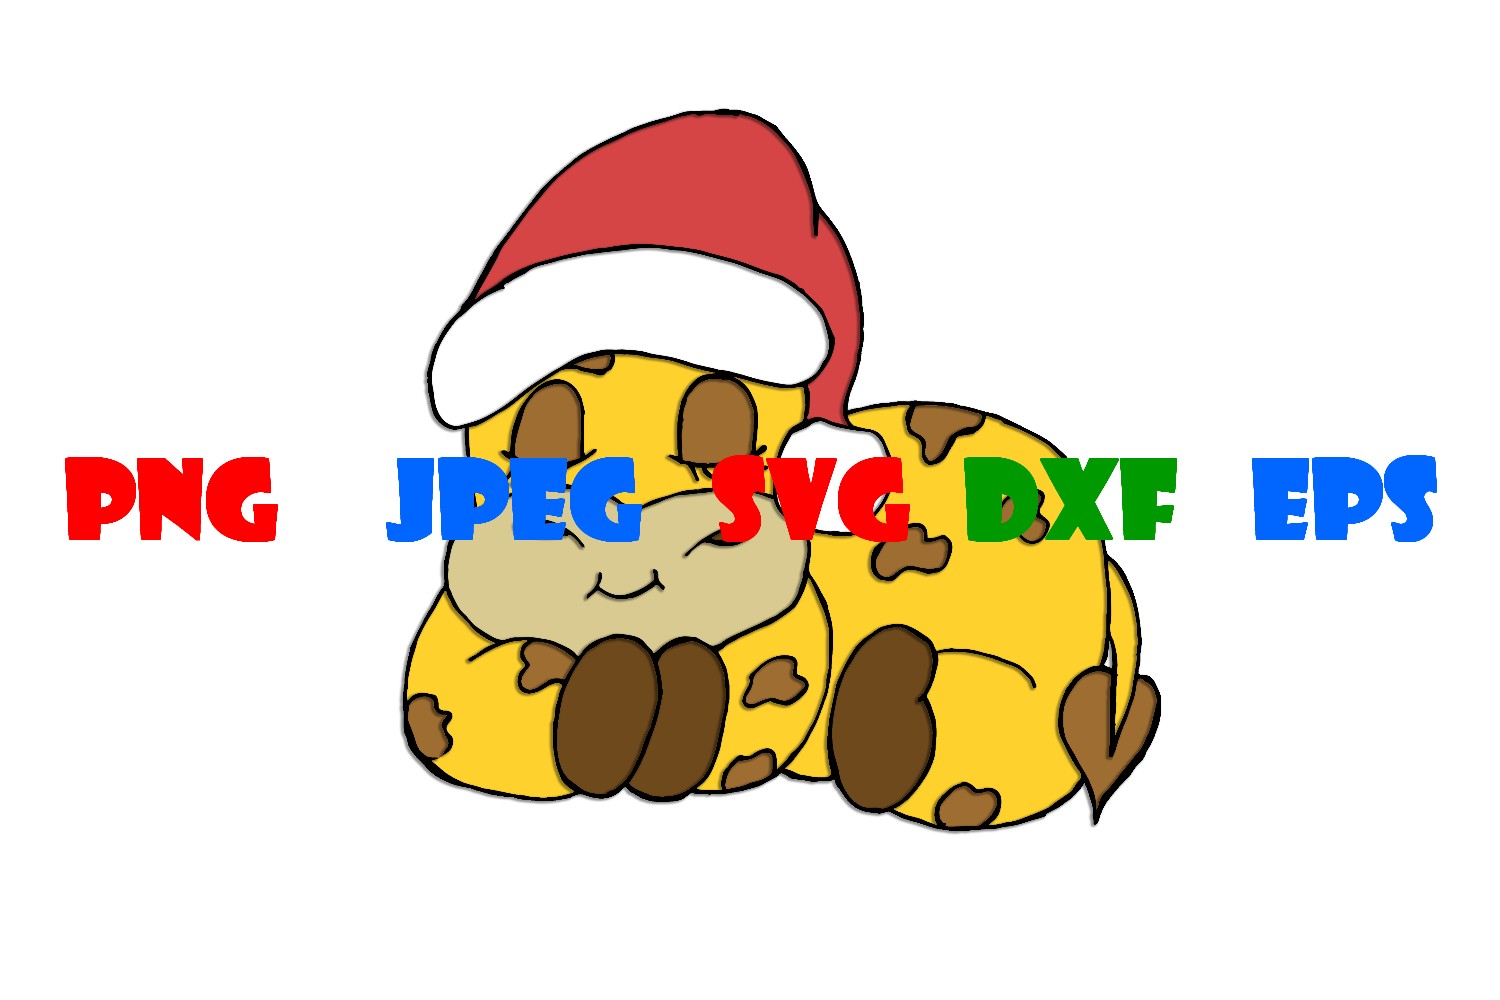 Cover image of 6 Really Cute Christmas Baby Giraffe Stickers.